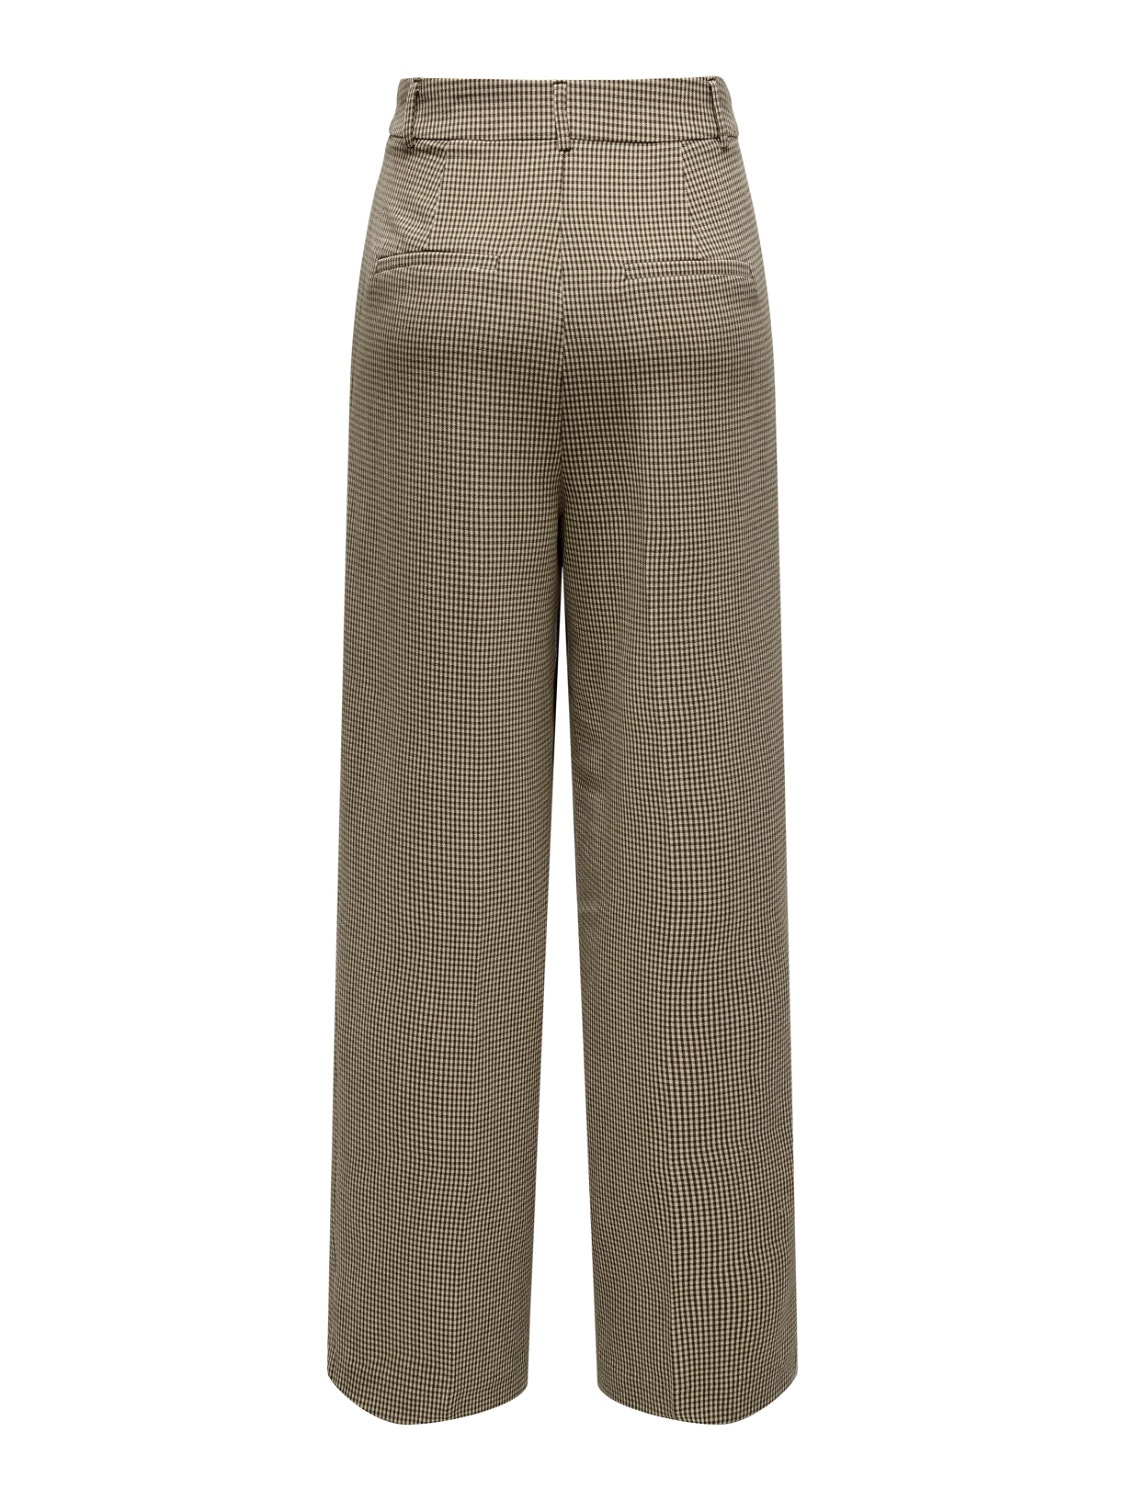 ONLY Regular Fit Trousers -Straw - 15257754